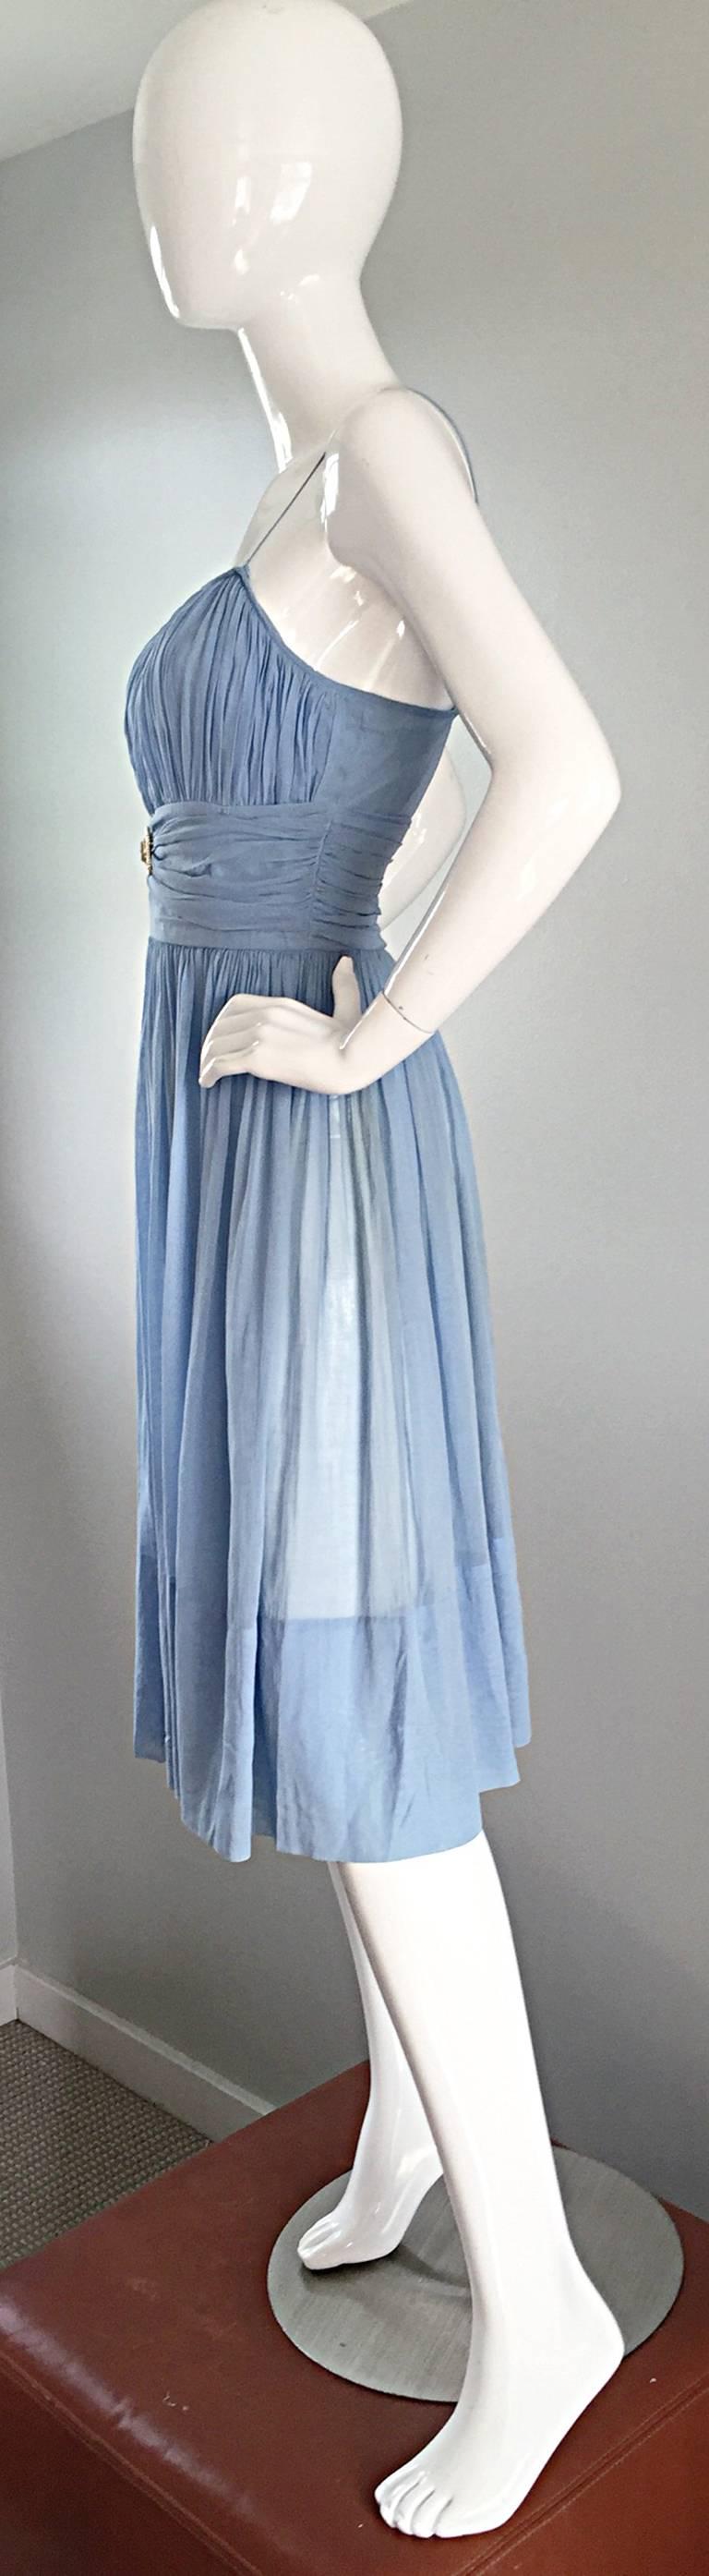 Chic 1950s 50s Light Pale Blue Cotton Pleated Ruched Full Skirt Dress, w/ Cameo  3